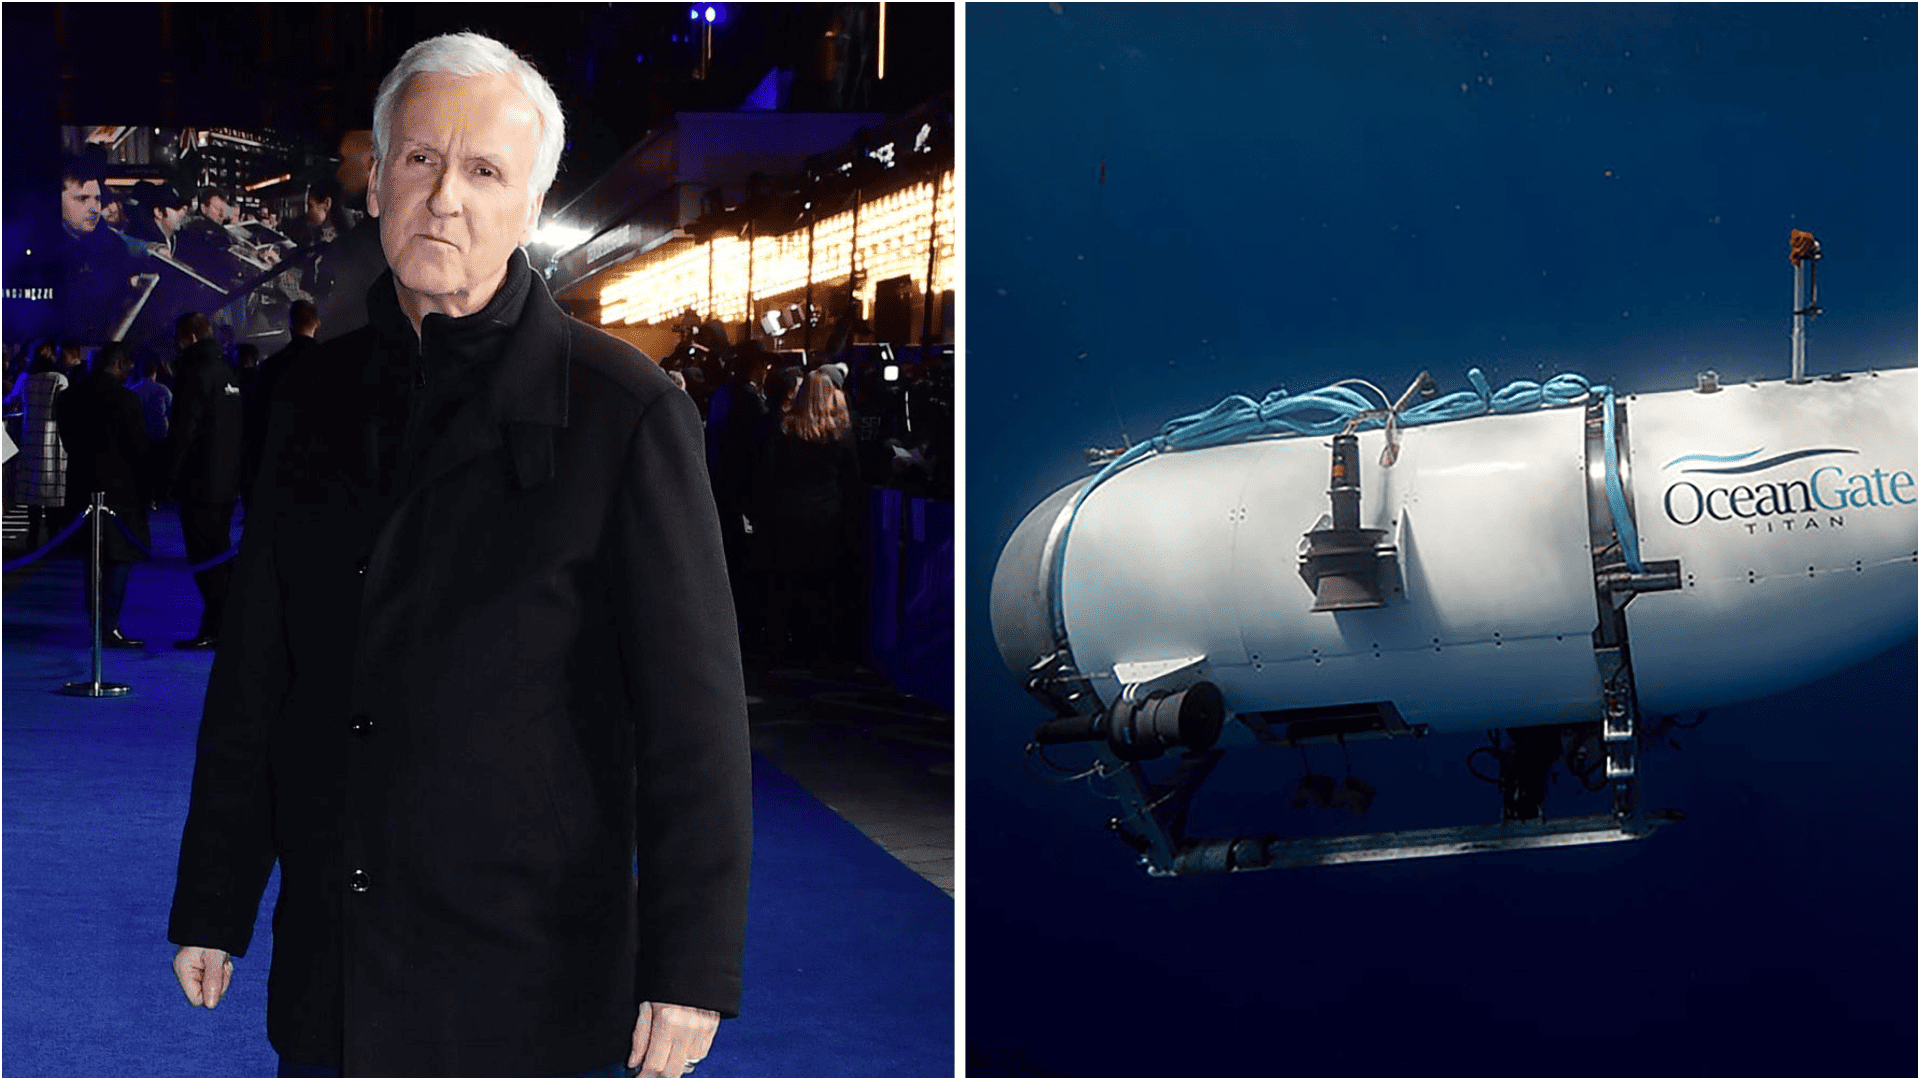 Titanic director approached about creating documentary drama on fatal Titan submersible